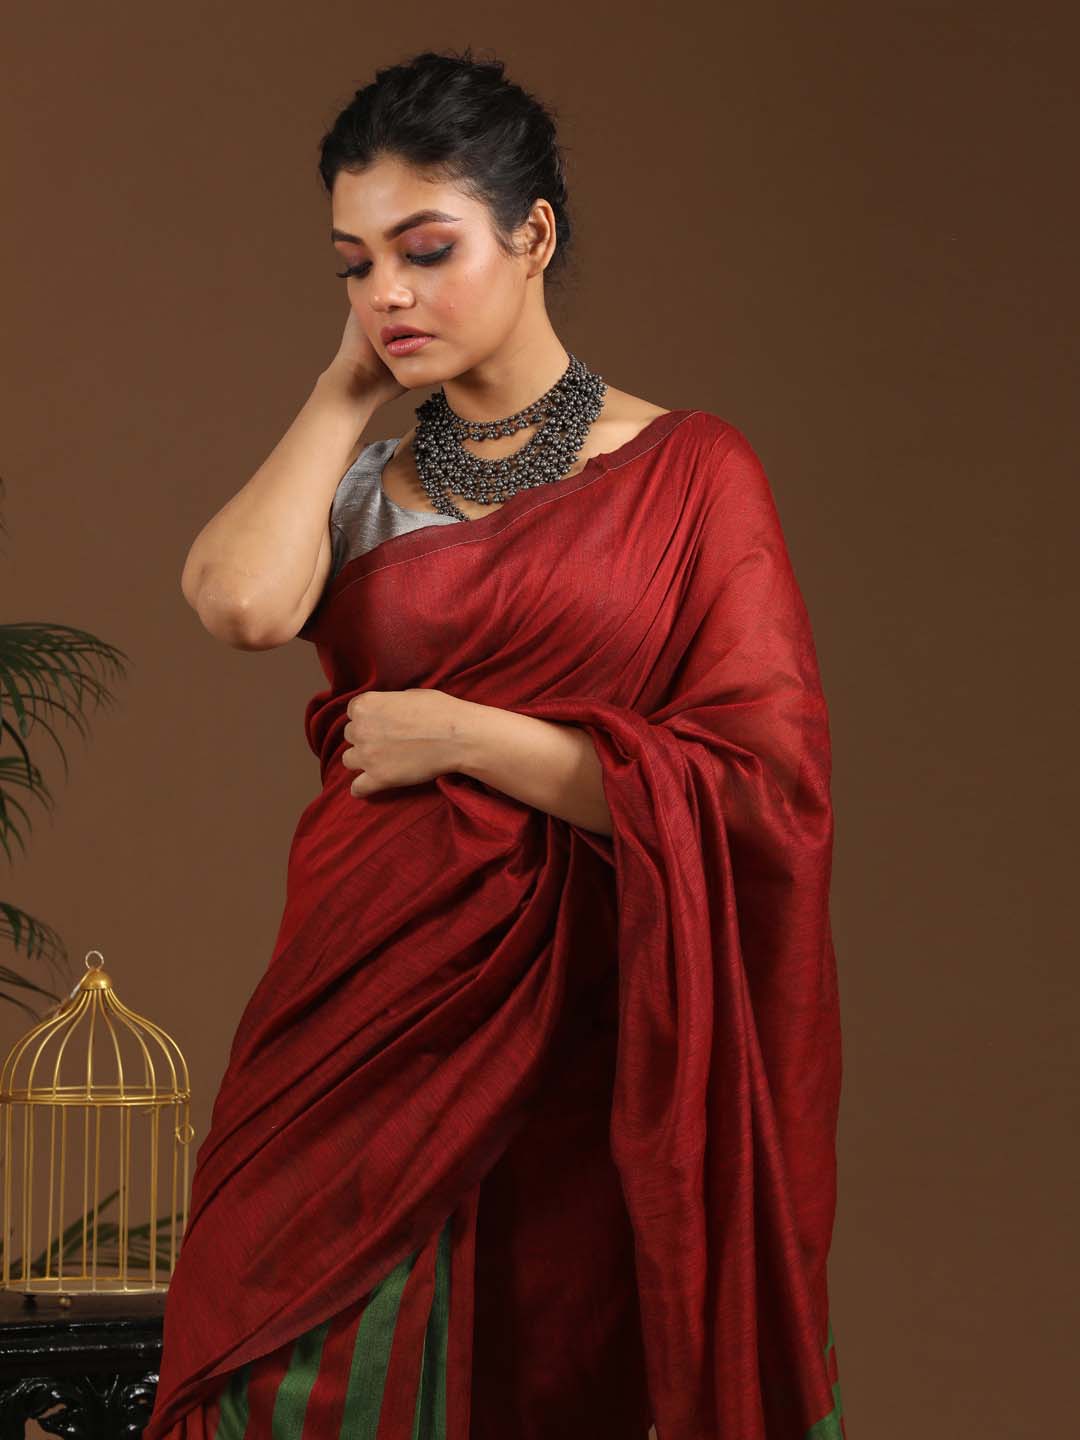 Indethnic Maroon Saree with Green Striped Pleats and Pallu - View 2